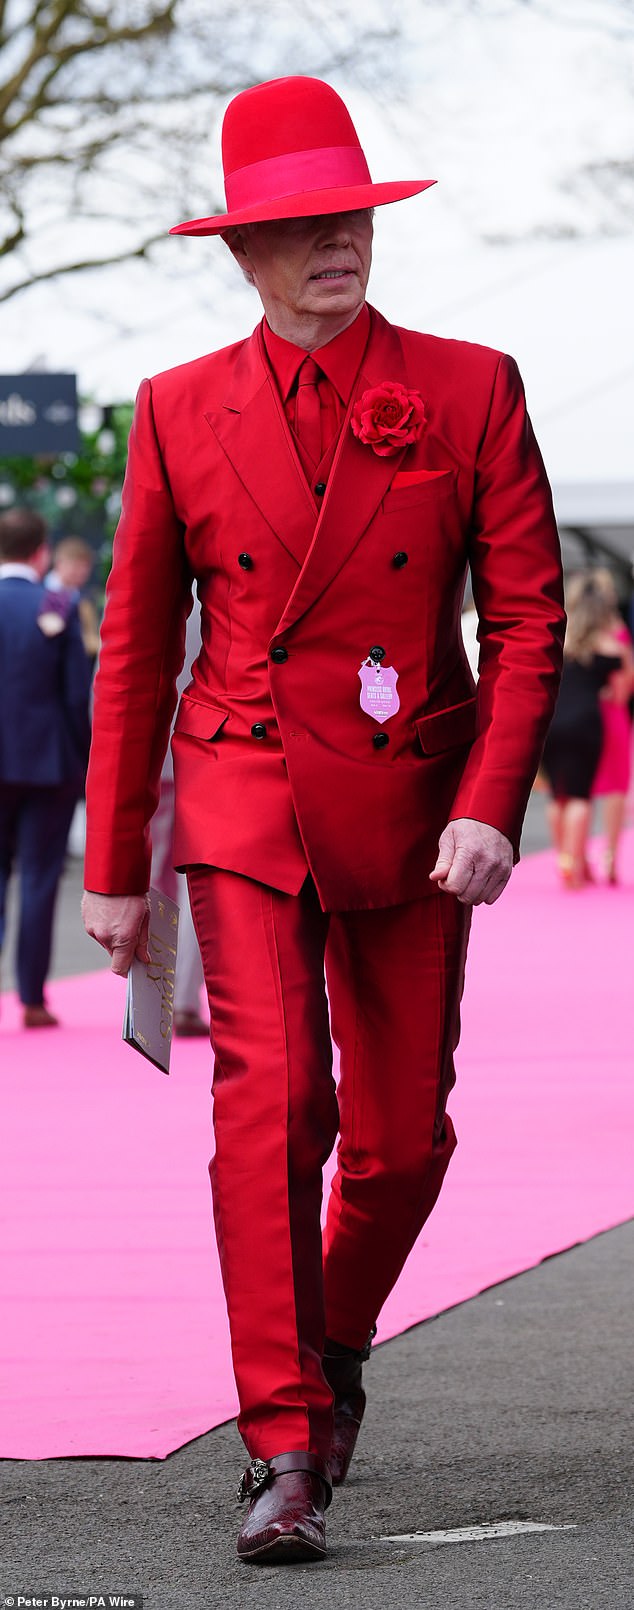 A reveller is pictured in a shiny red suit, complete with a hat, as he makes his arrival at Aintree Racecourse